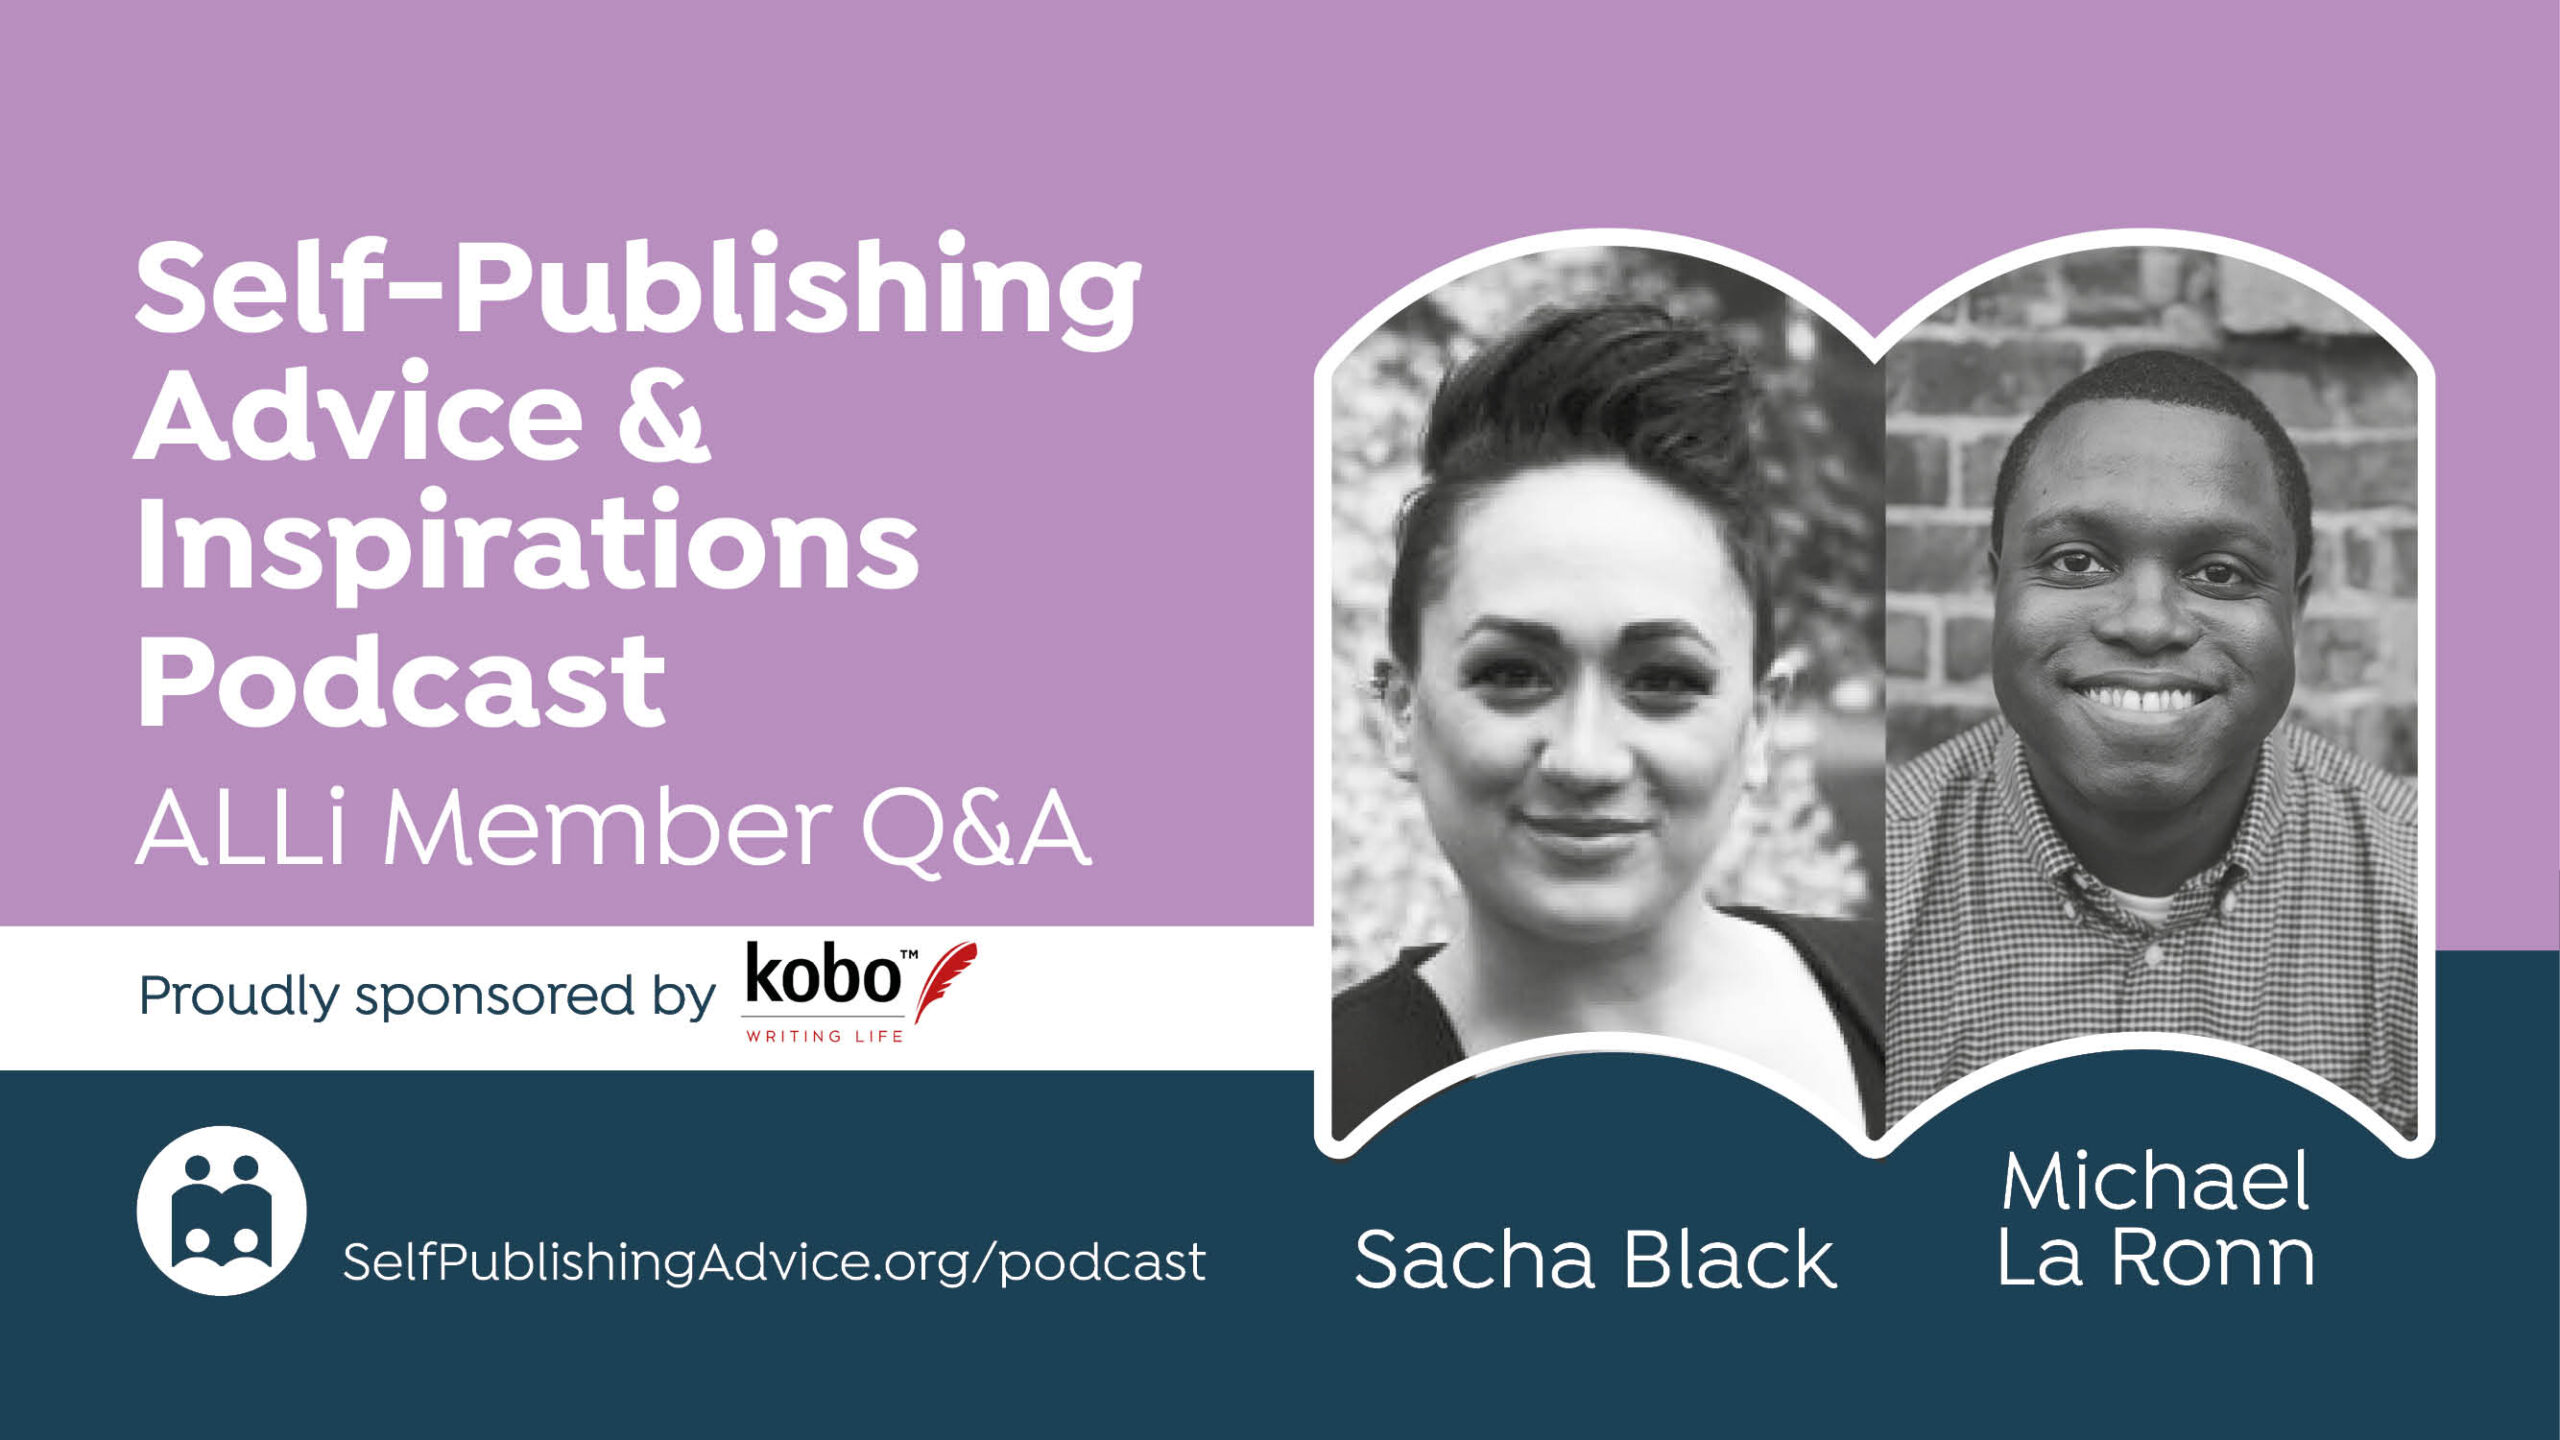 Book Design Plagiarism, Getting Your Book Into Bookstores, Negotiating Rights, And More Questions Answered By Michael La Ronn And Sacha Black In Our Member Q&A Podcast